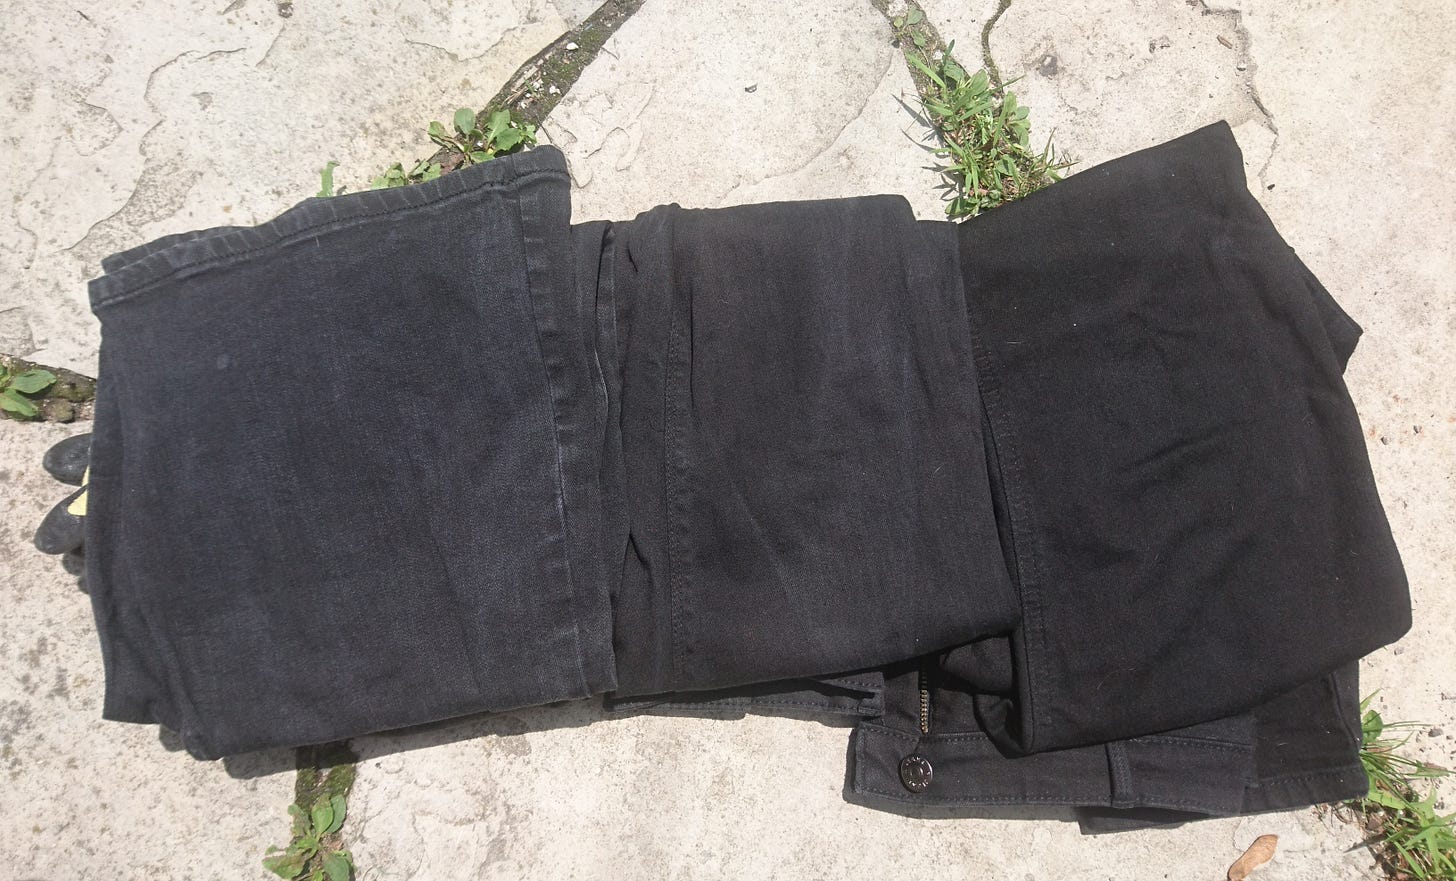 three pairs of black jeans folded into quarters and lined up on flagstones with moss between the cracks